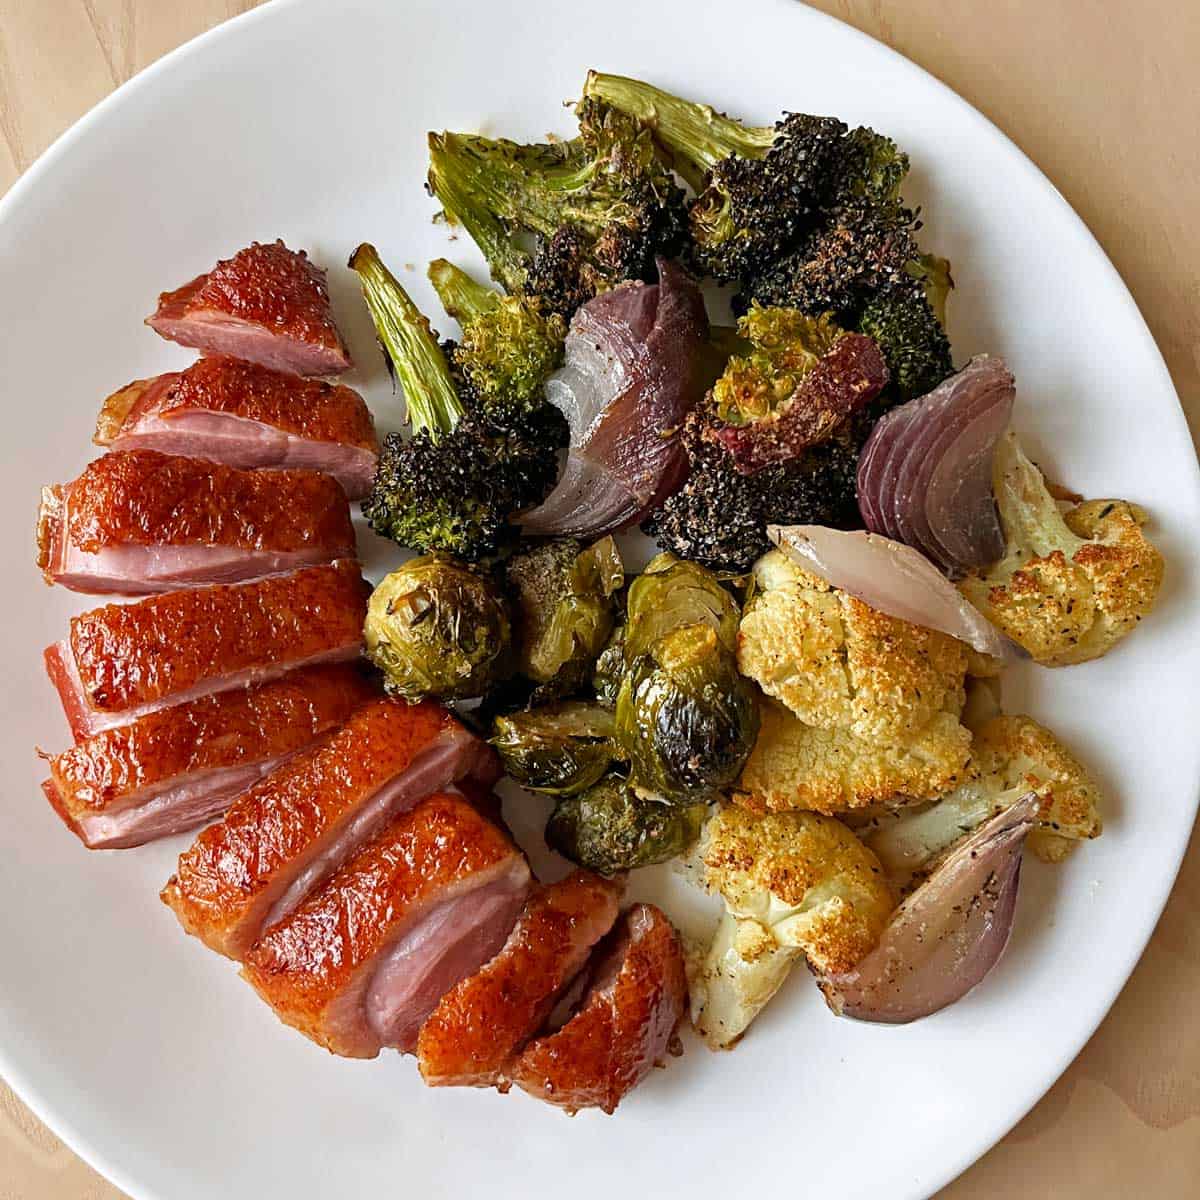 Roasted vegetables are served with duck breast.